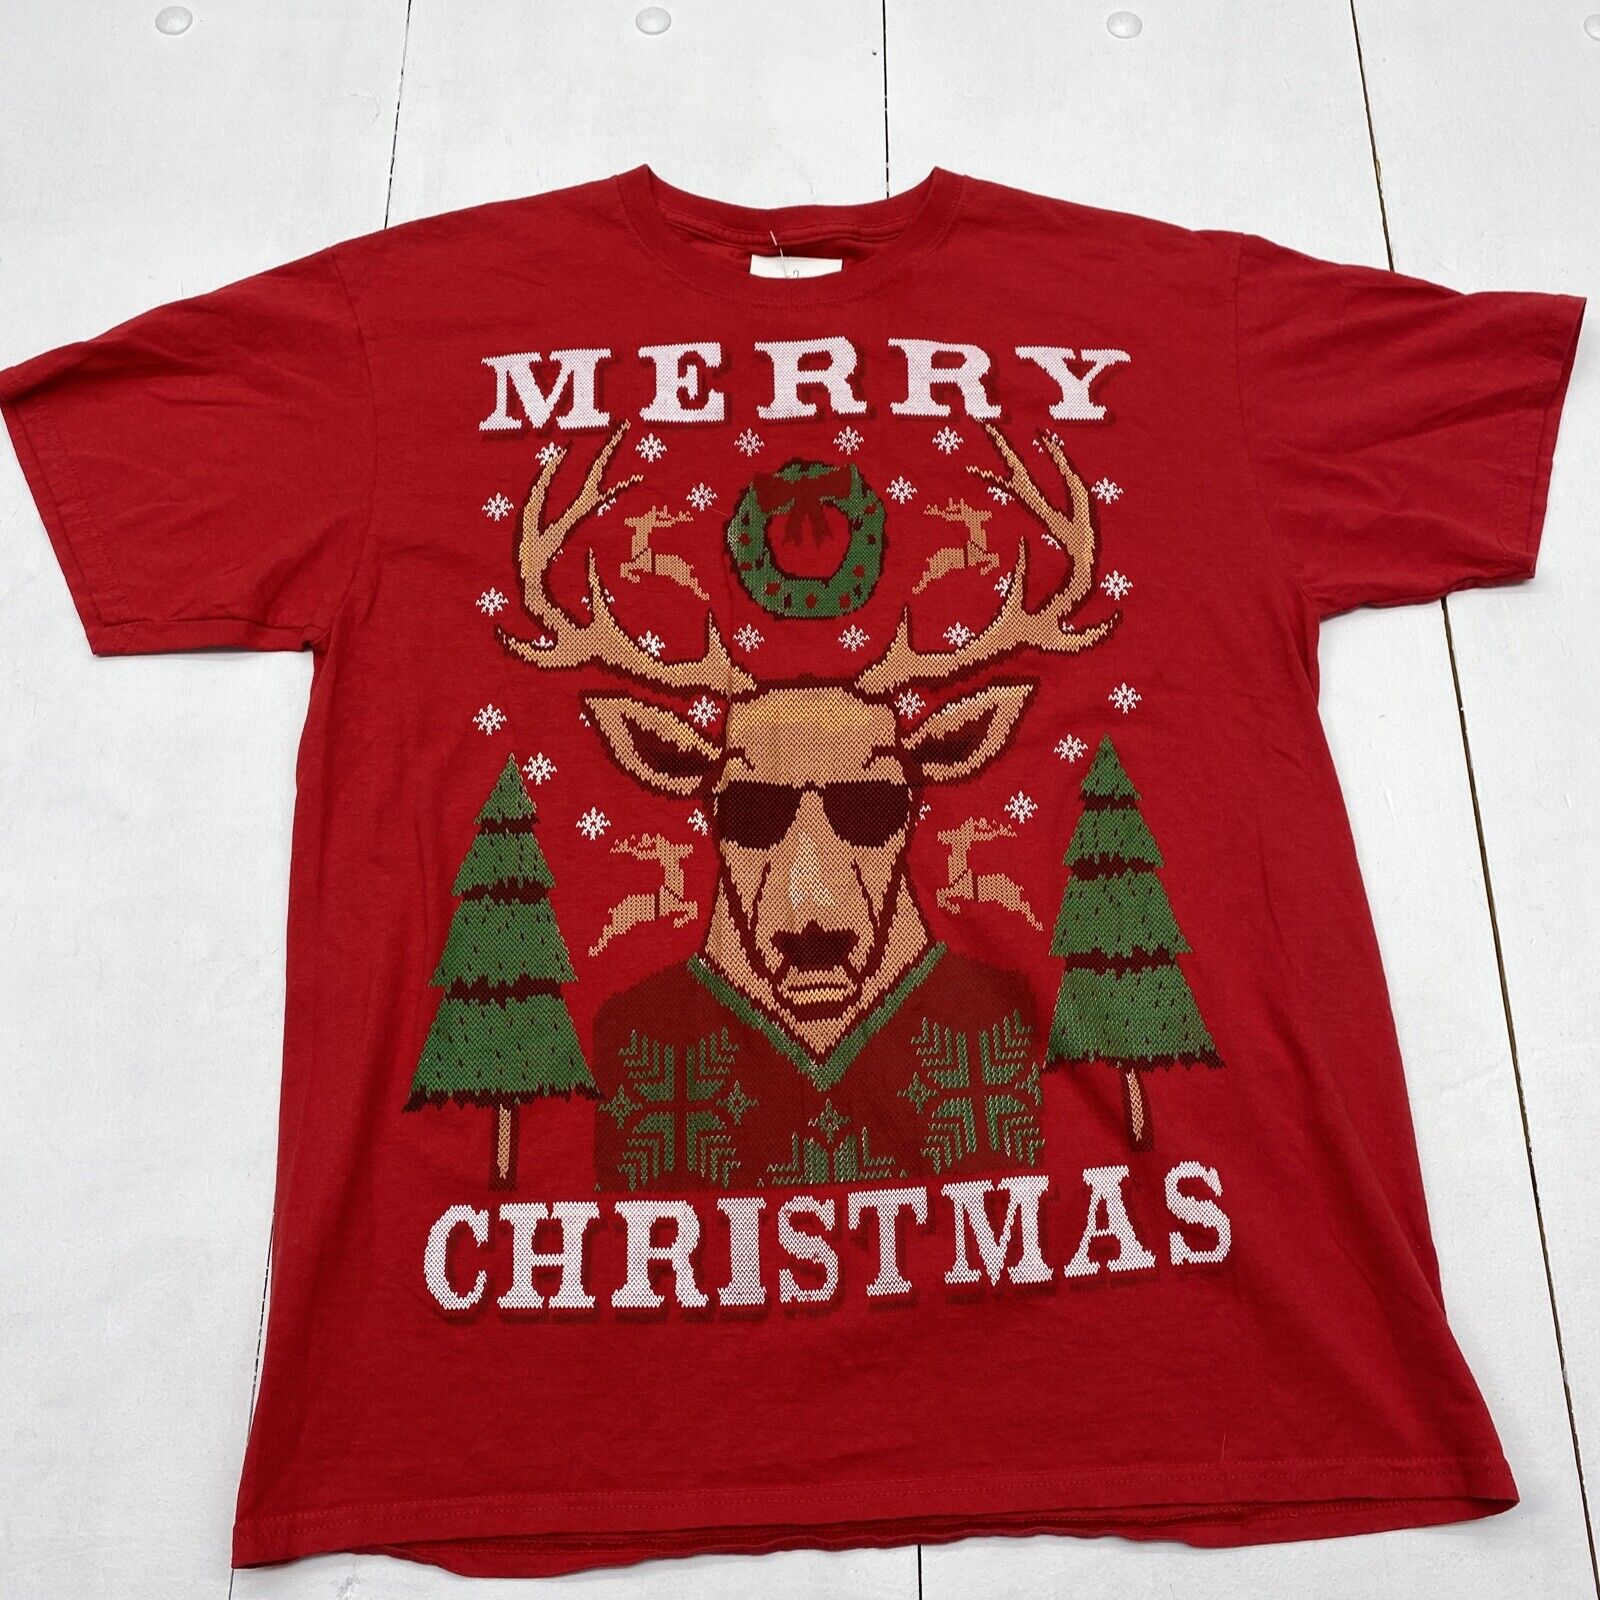 Christmas Graphic Print Red Short Sleeve T-Shirt Mens Size Large